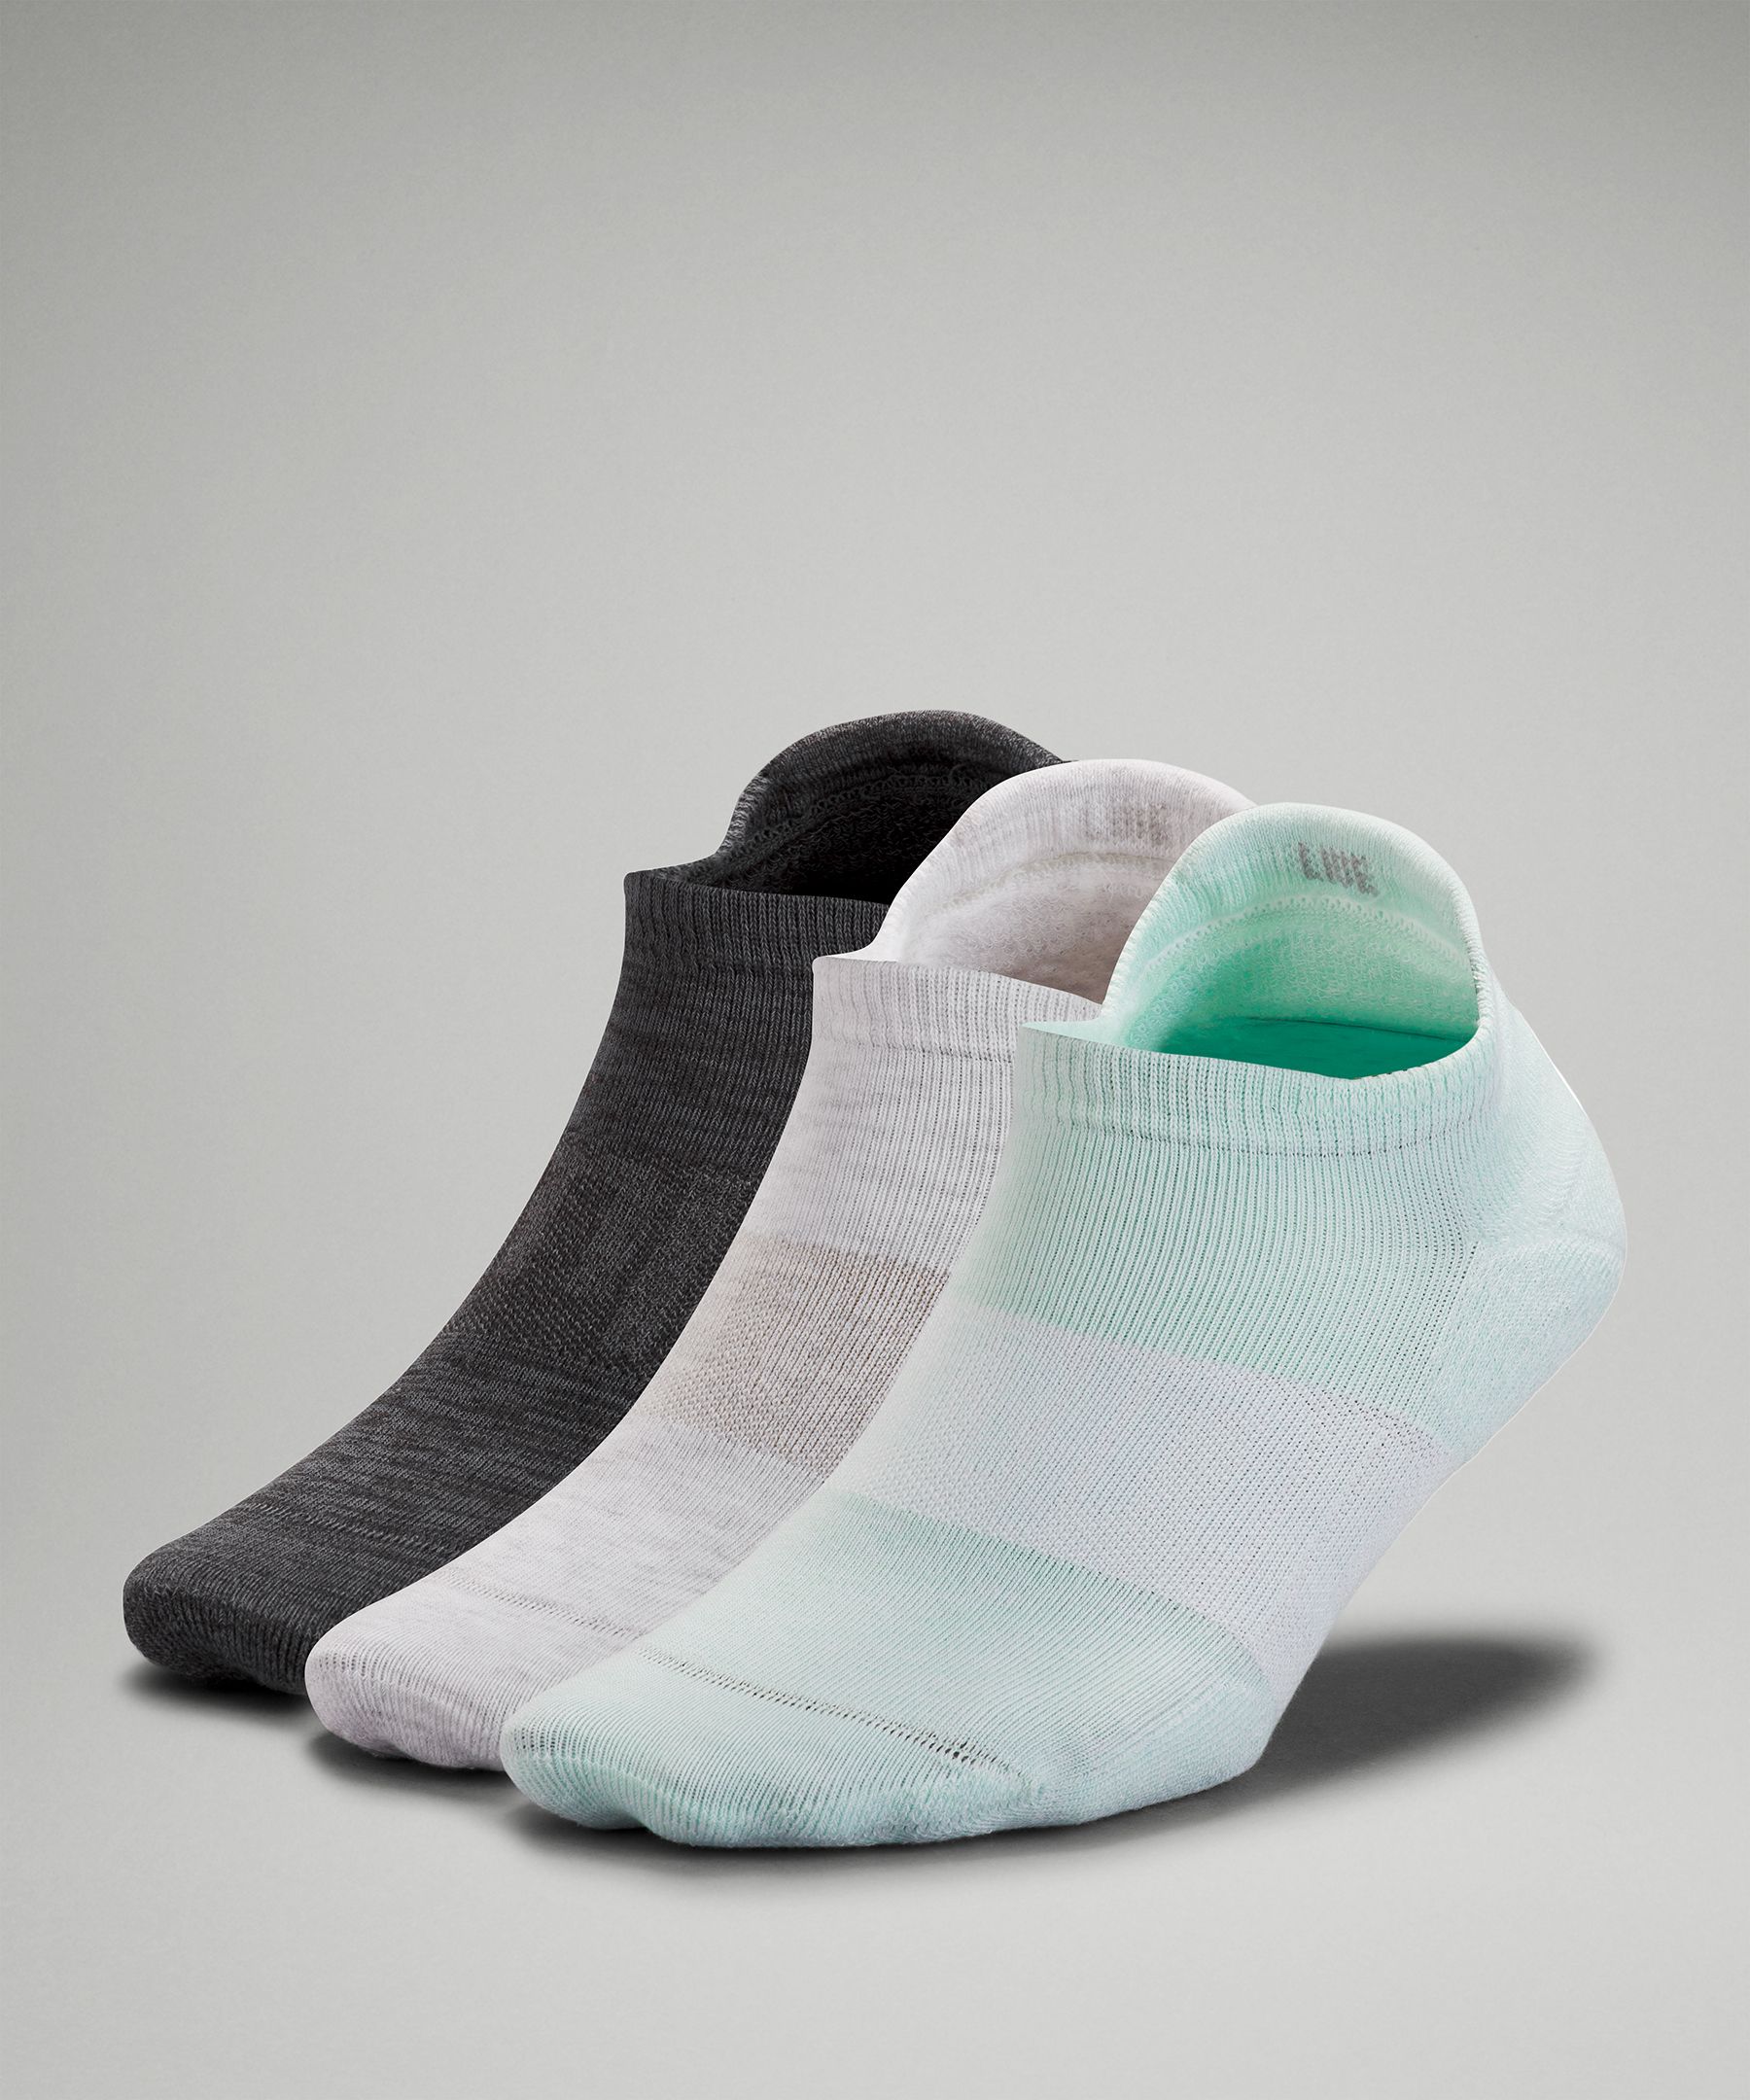 Lululemon Daily Stride Low-ankle Socks 3 Pack In Delicate Mint/white/heather Grey